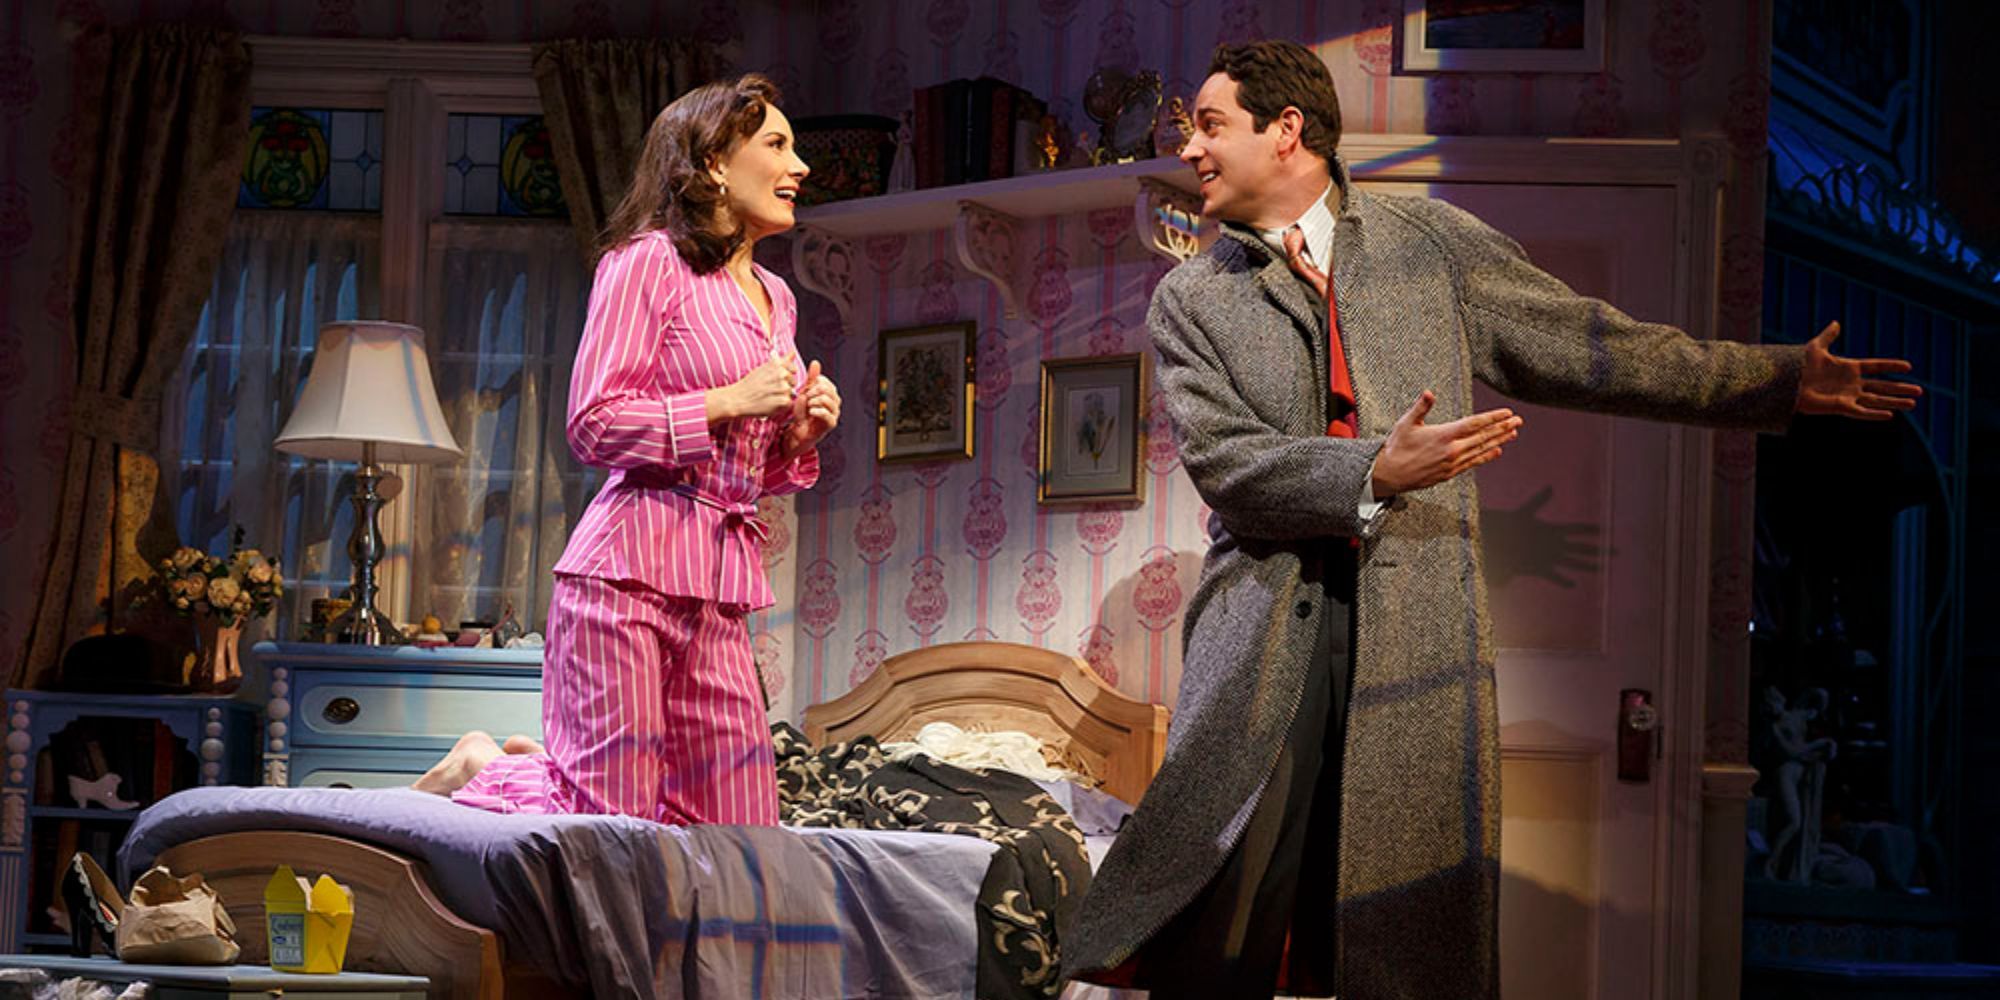 Laura Benanti and Zachary Levi as Amalia and Georg in 'She Loves Me'